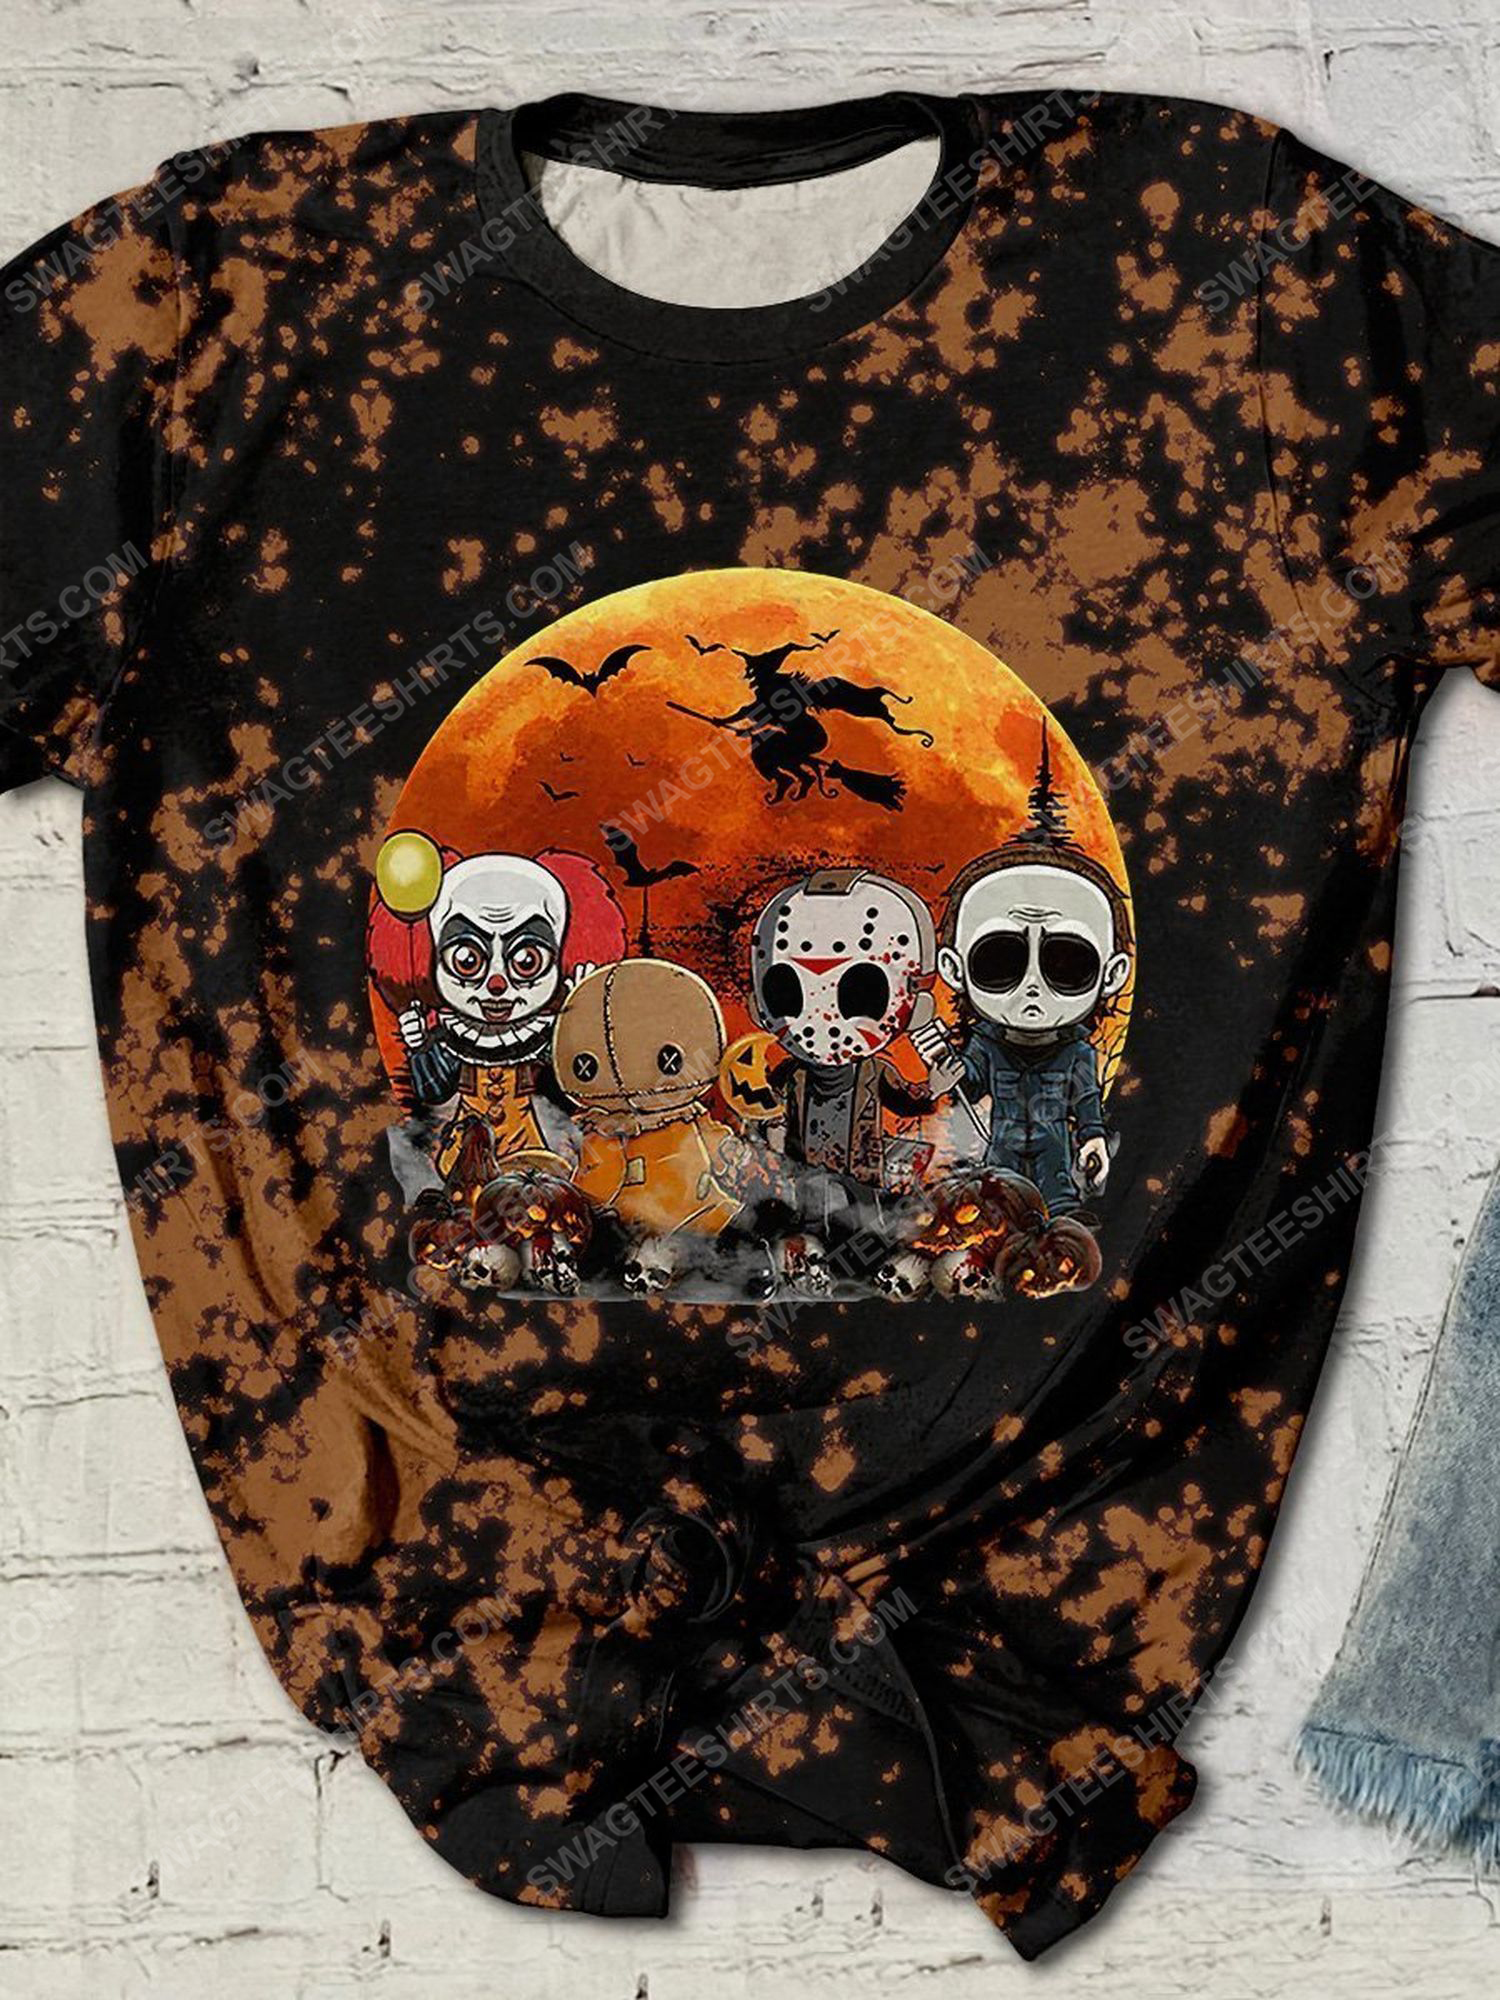 [special edition] Halloween night and horror movie character full print shirt – maria (halloween)